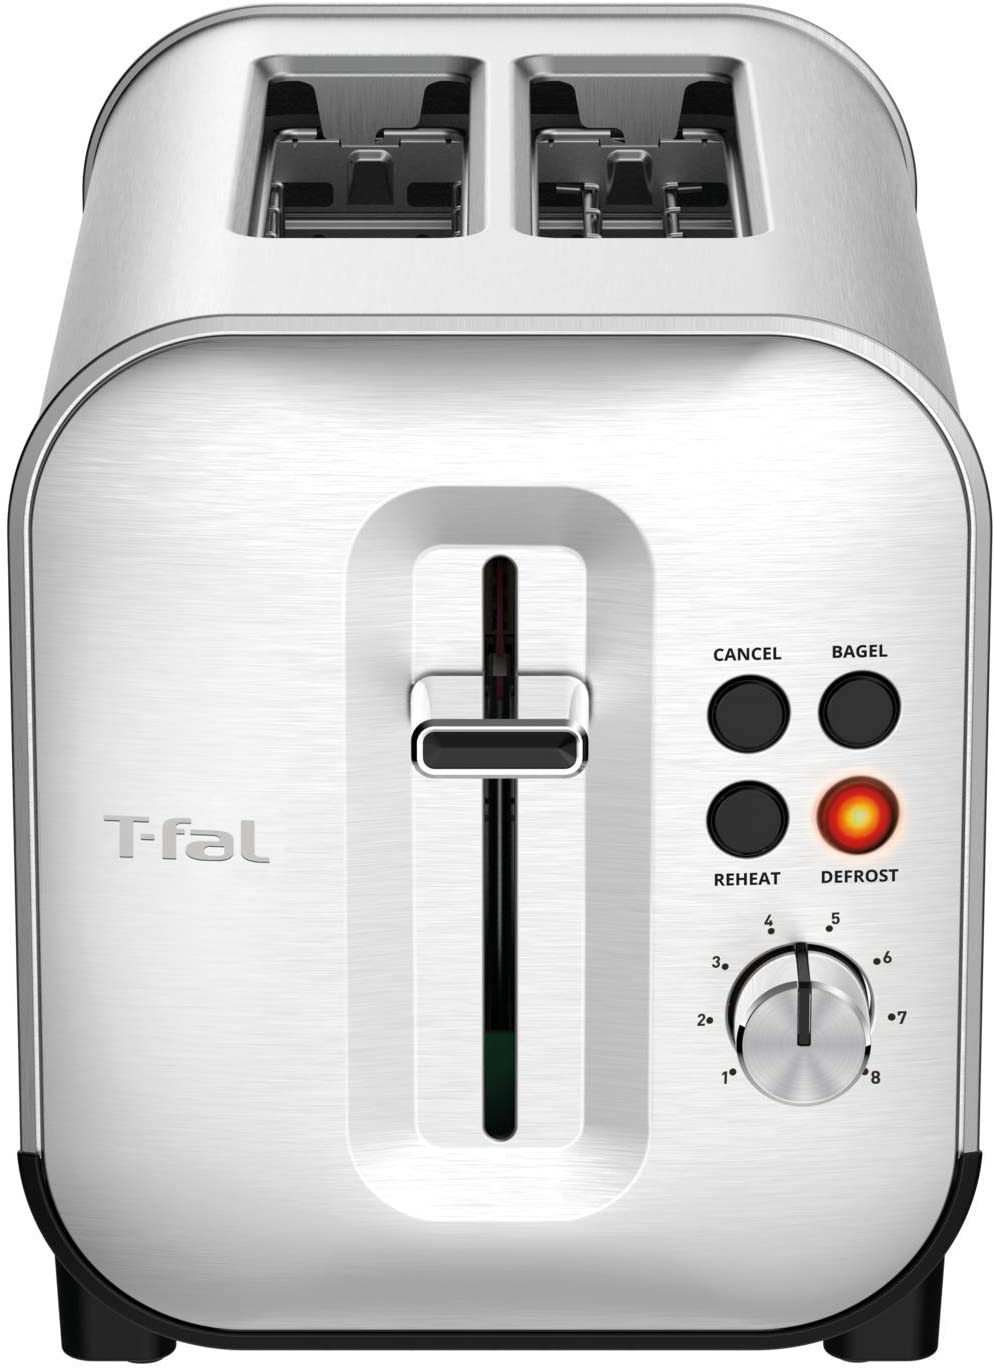 T-FAL 2 Slice Stainless Steel Toaster - Blemished package with full warranty - TT682D50